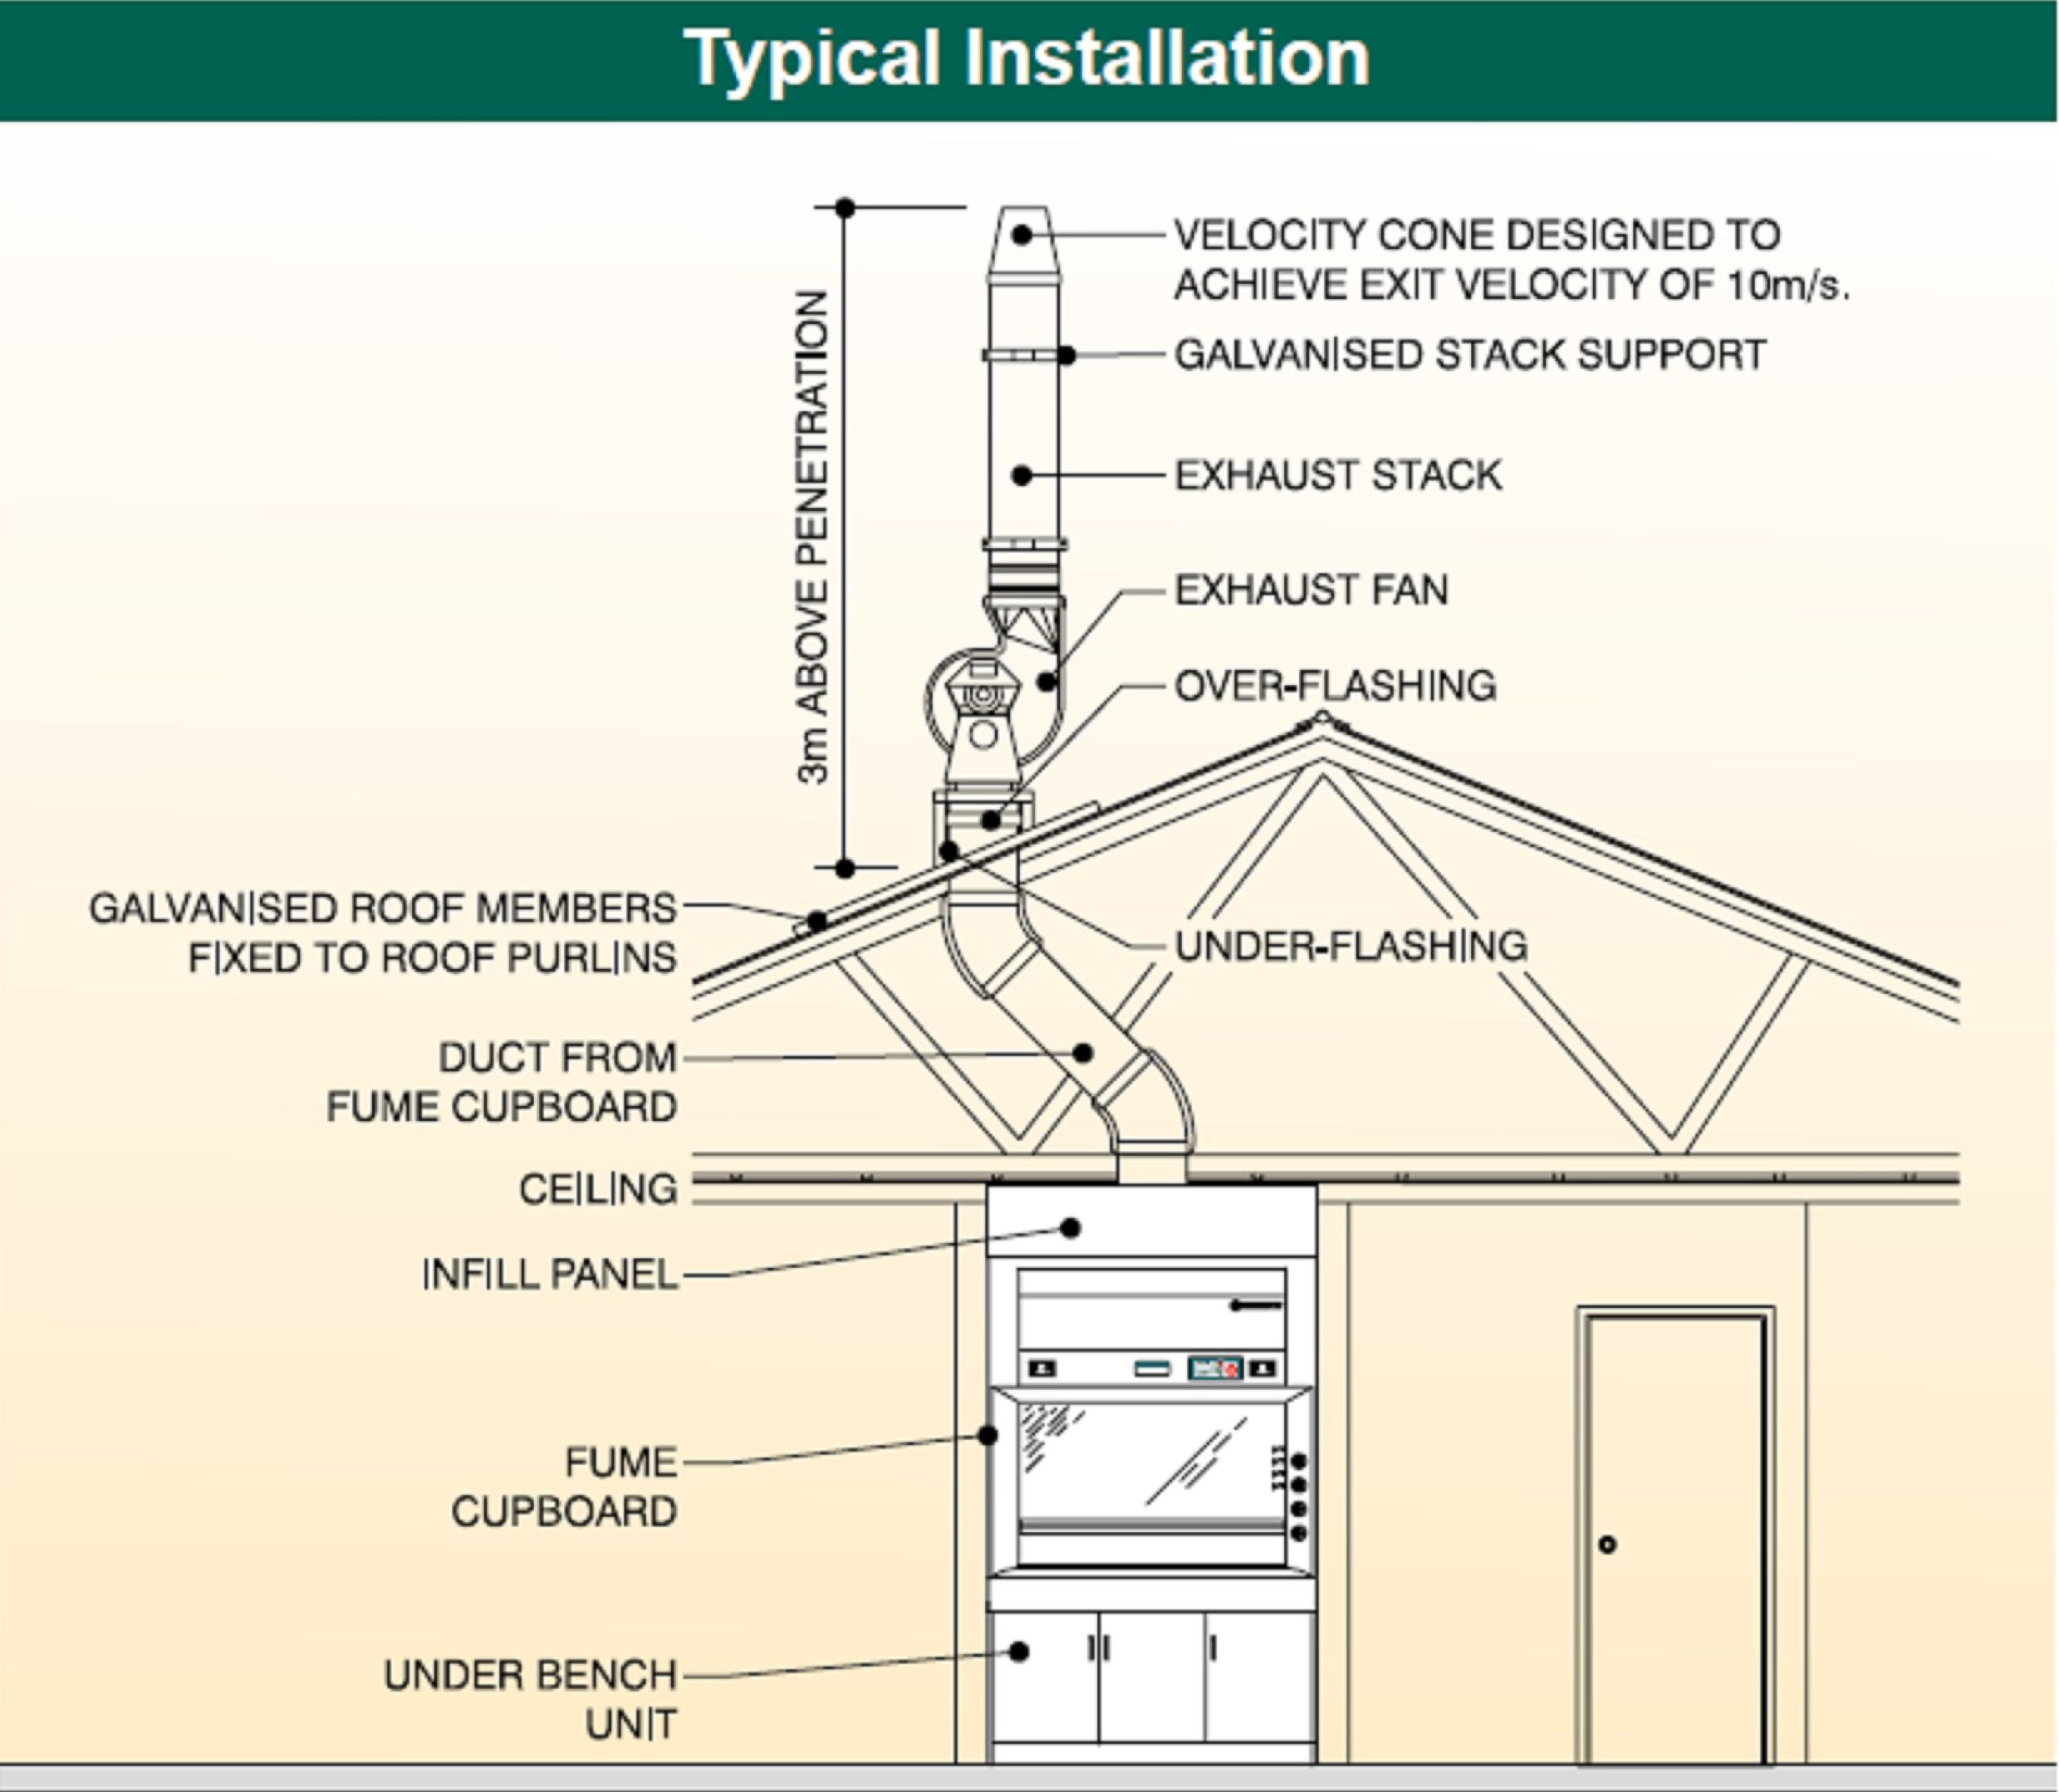 Typical Installation (Page 2)